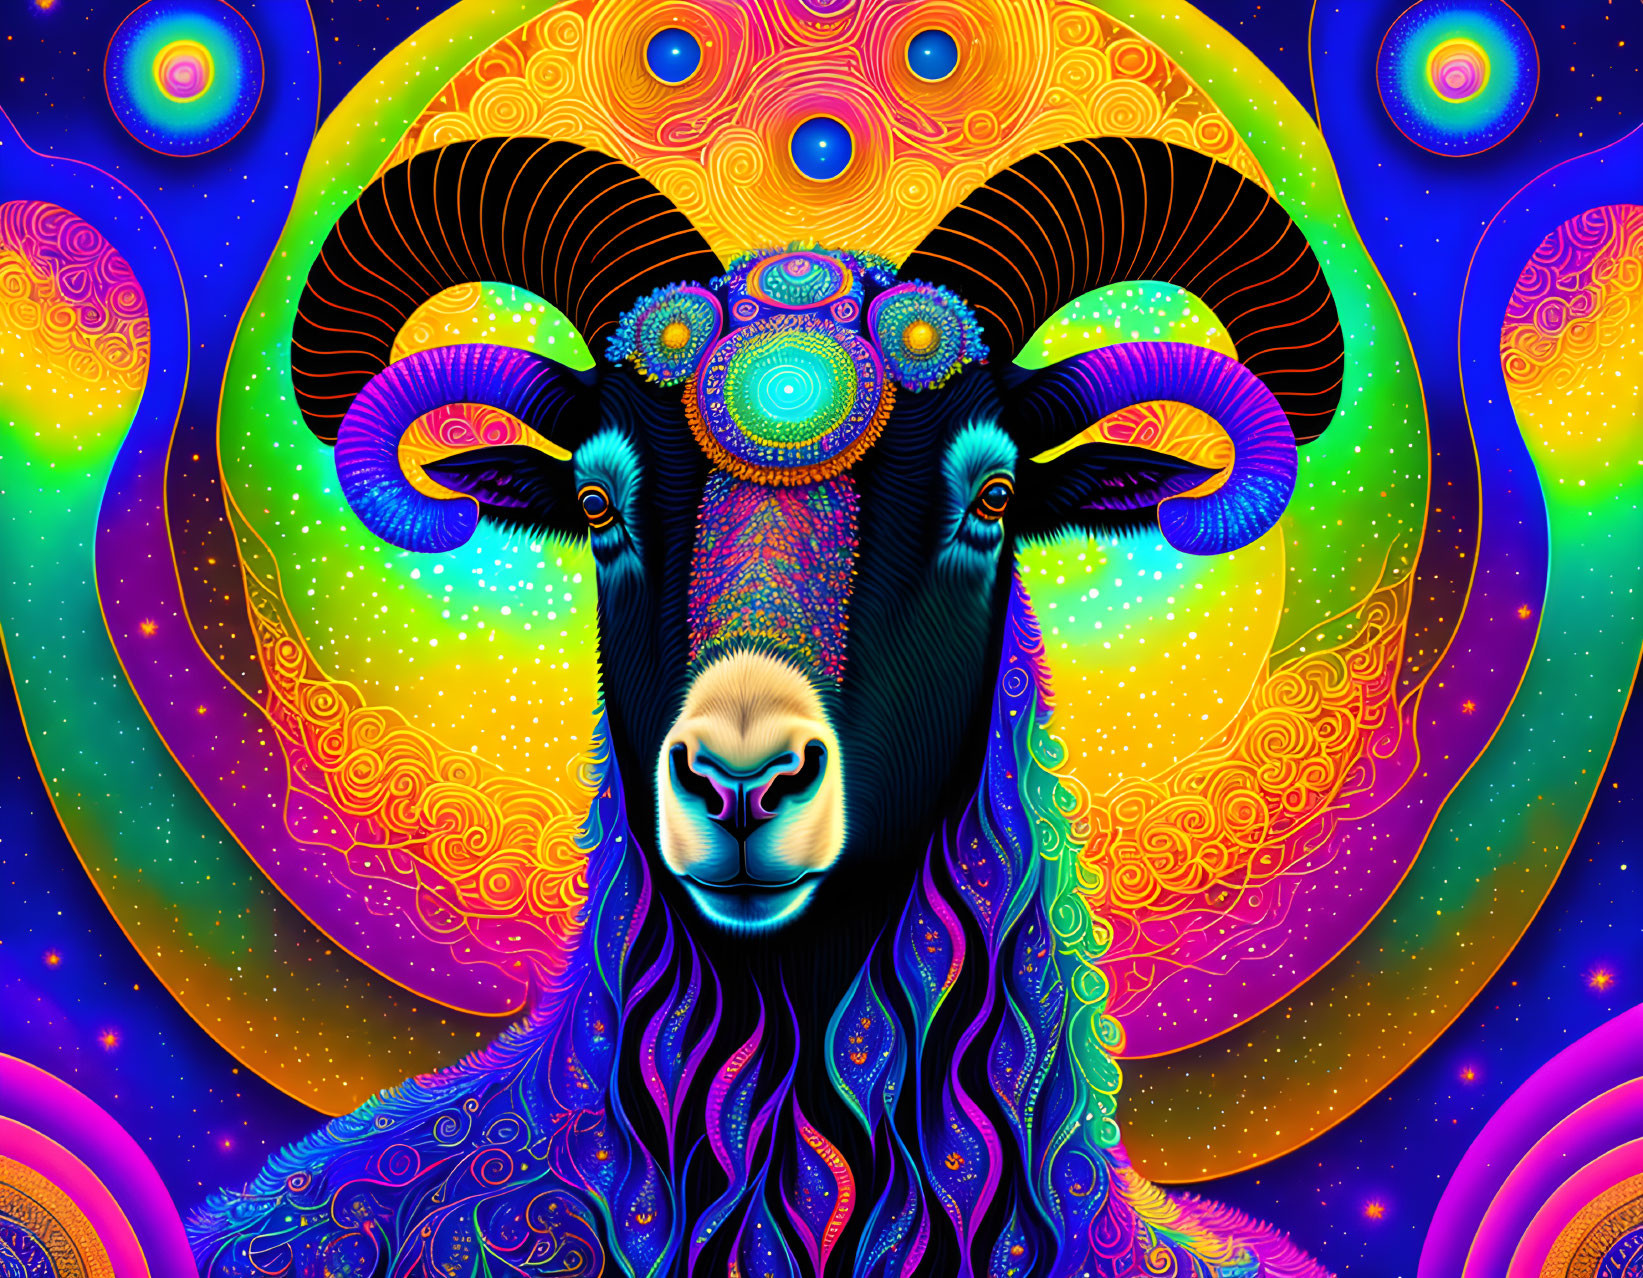 Colorful Stylized Ram Artwork on Psychedelic Cosmic Background